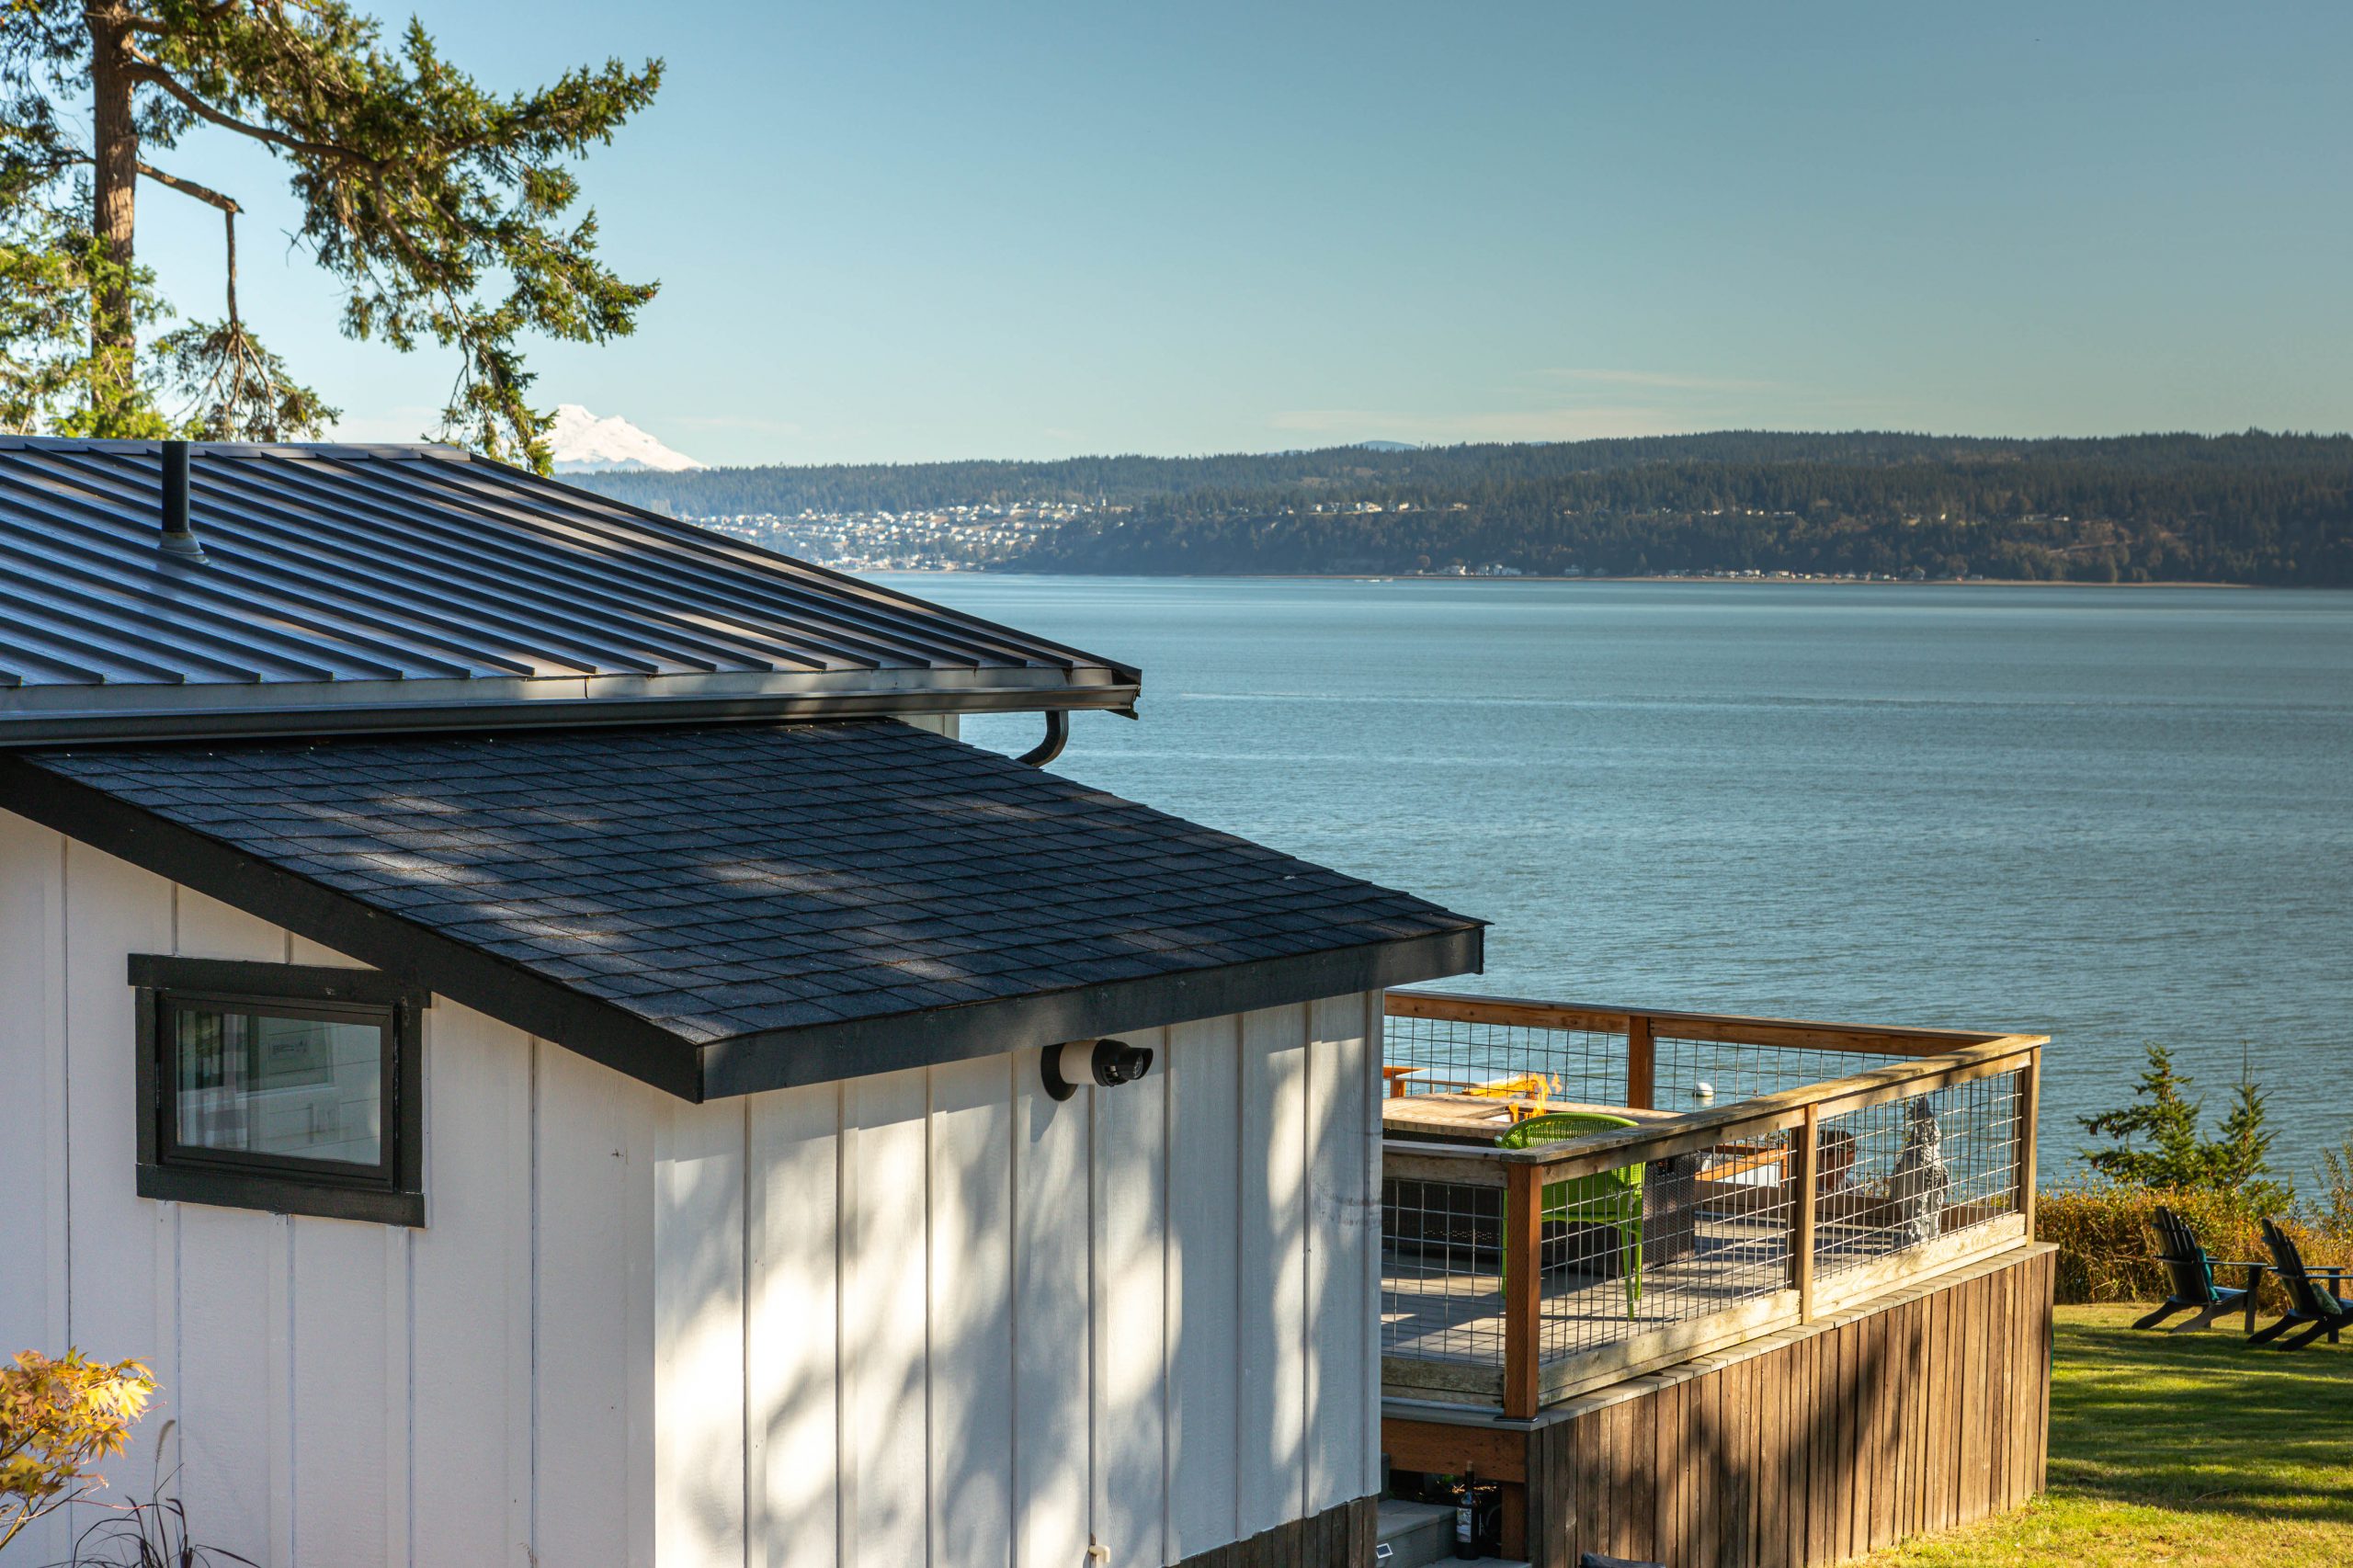 Water views, Whidbey Island home, House on Whidbey Island, Windermere Real Estate, Deck, Mountain View